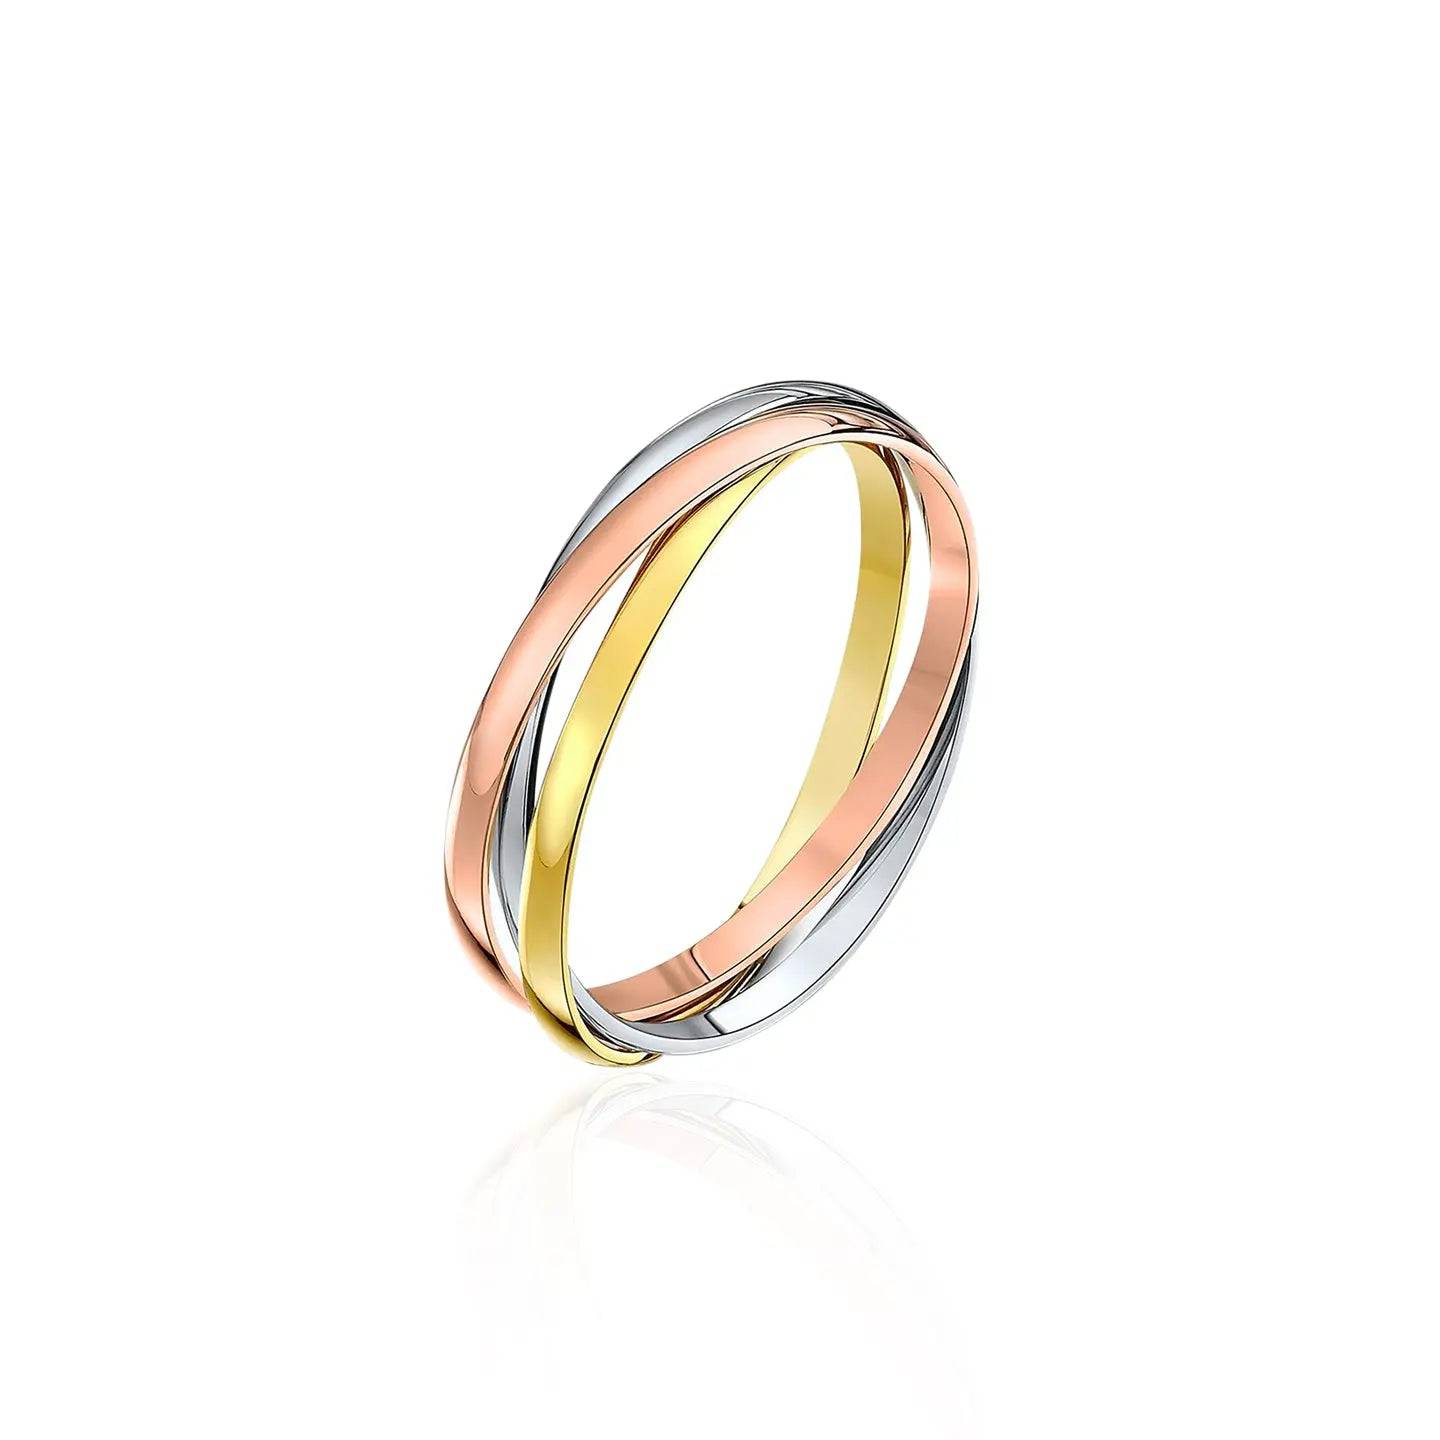 Tricolor Threaded Stack - Minimalistic Gold, Silver, Rose Gold Ring Set - Baza Boutique 